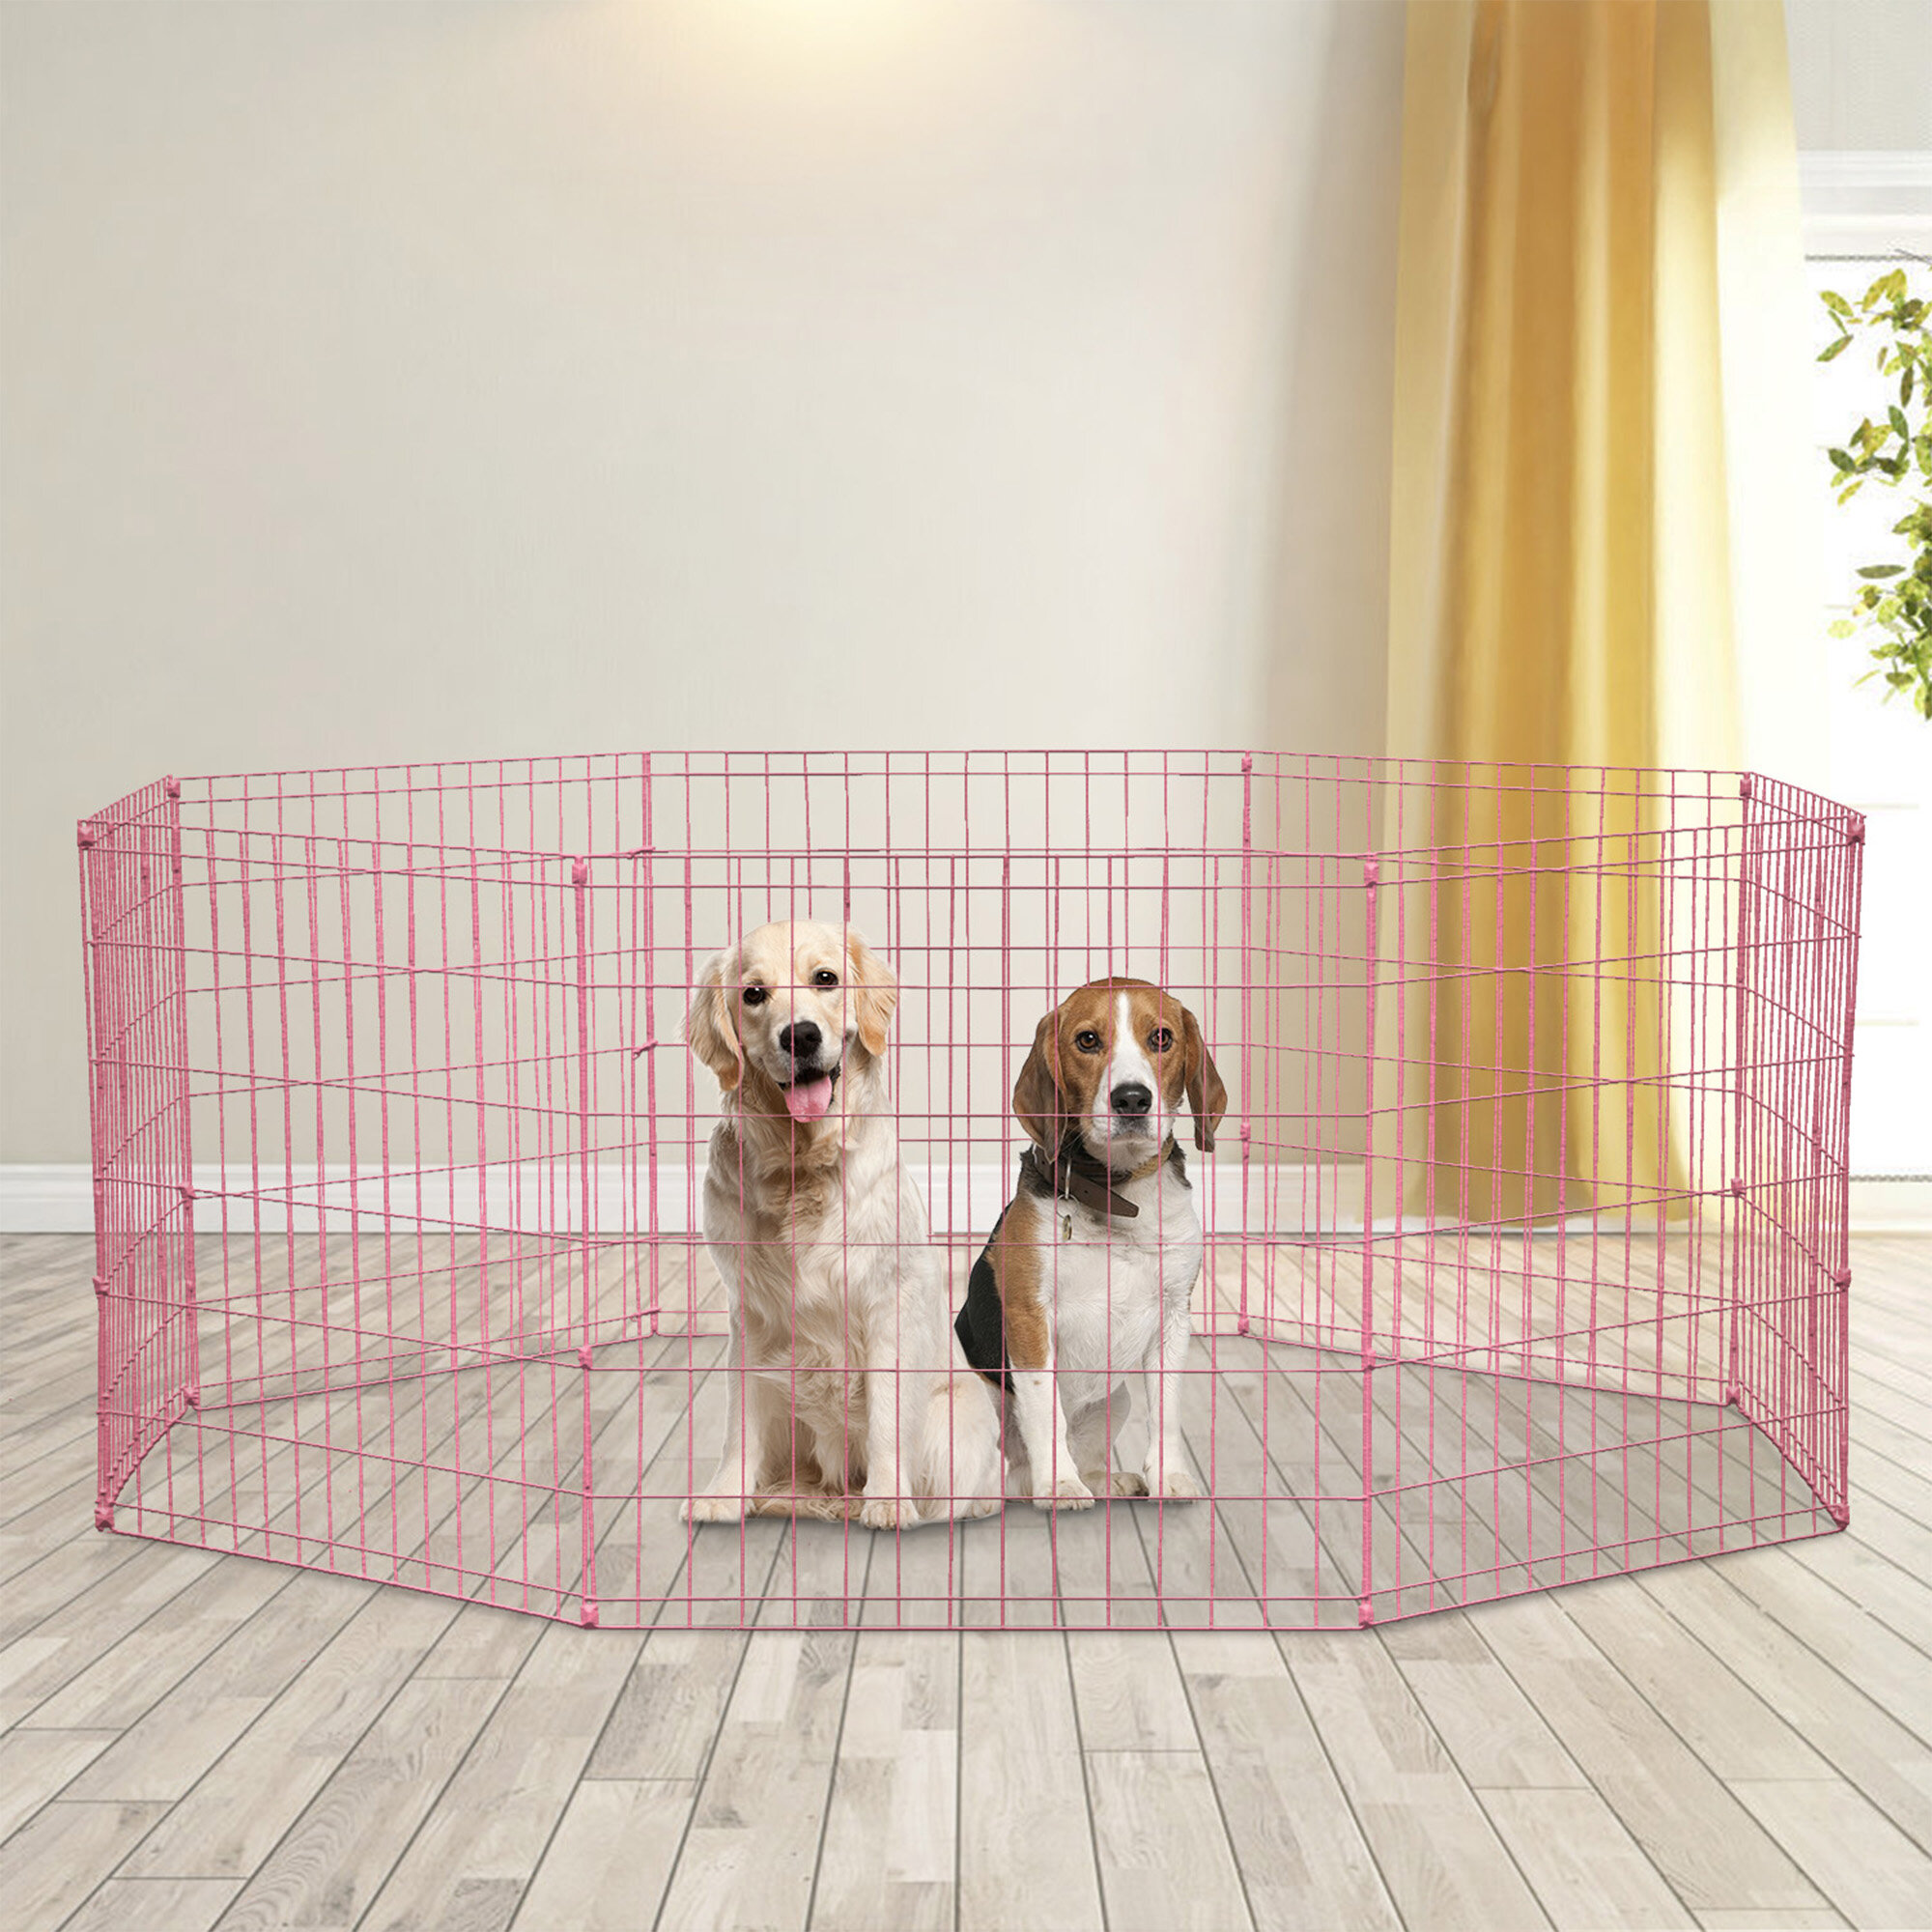 Pet Dogs Outdoor Games Exercise Agility Training Equipment Barrier